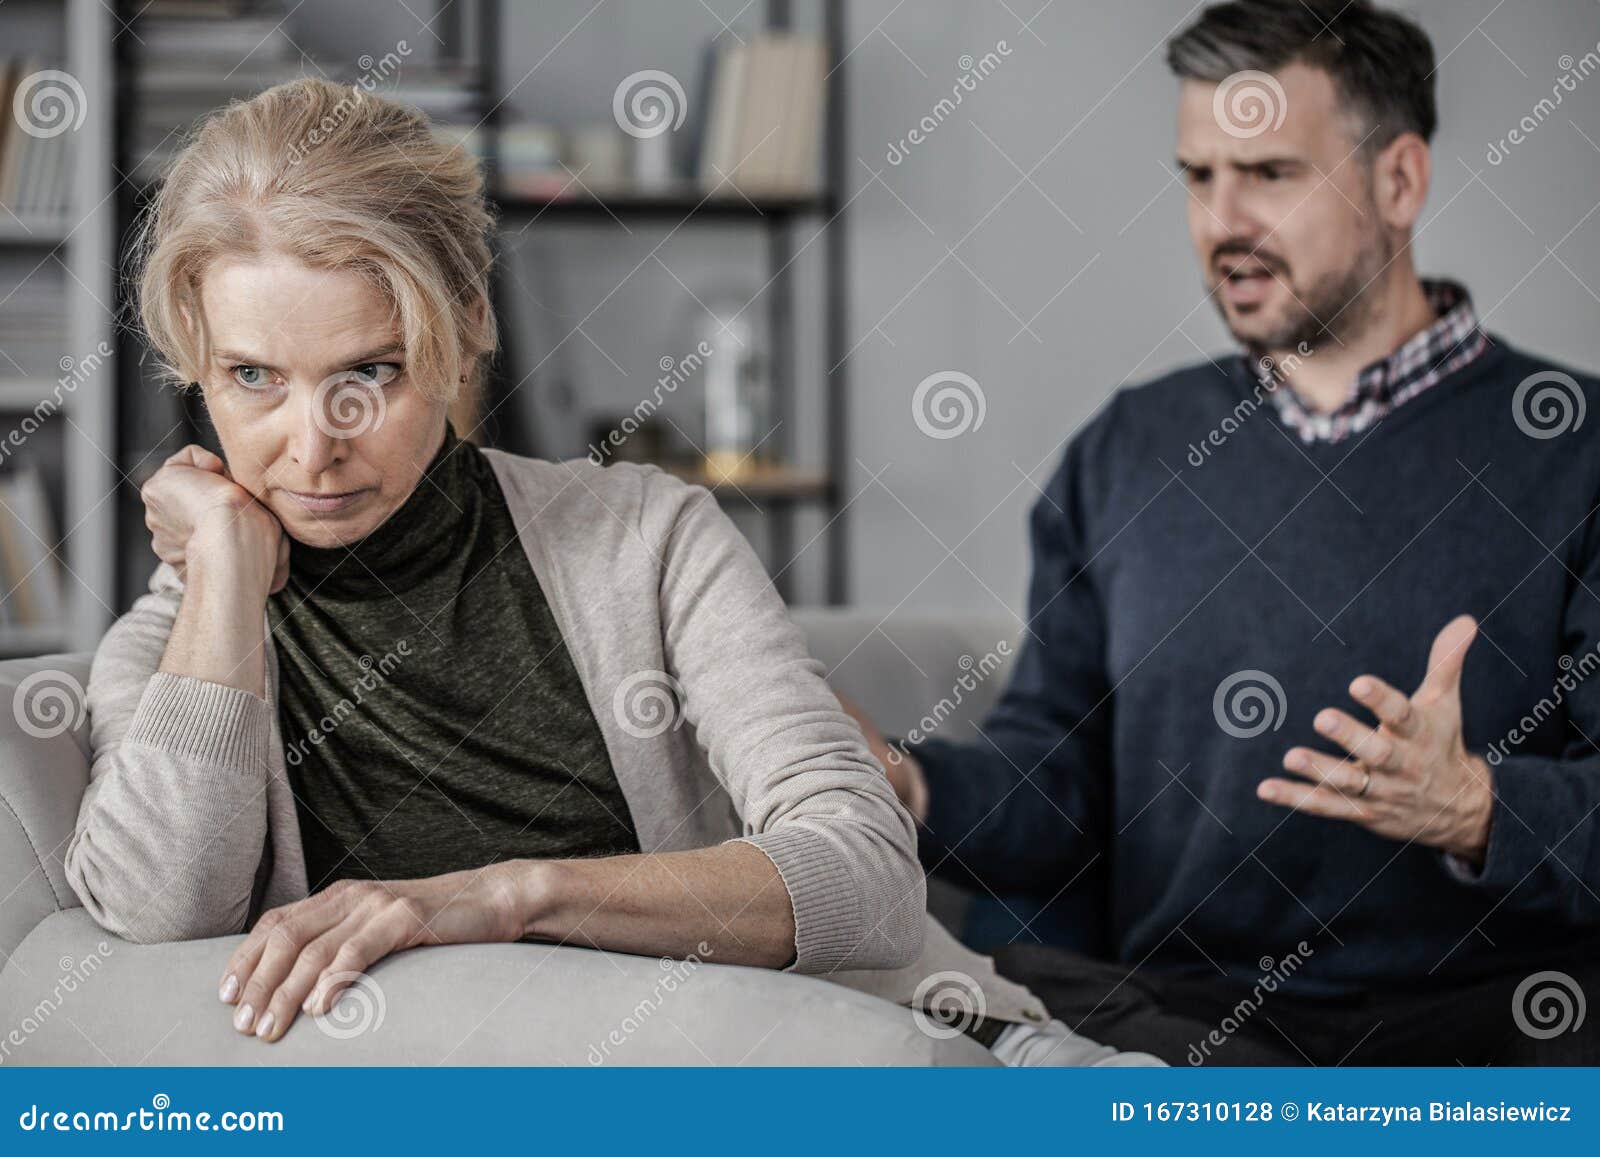 Wife Giving Husband The Silent Treatment Stock Ph image